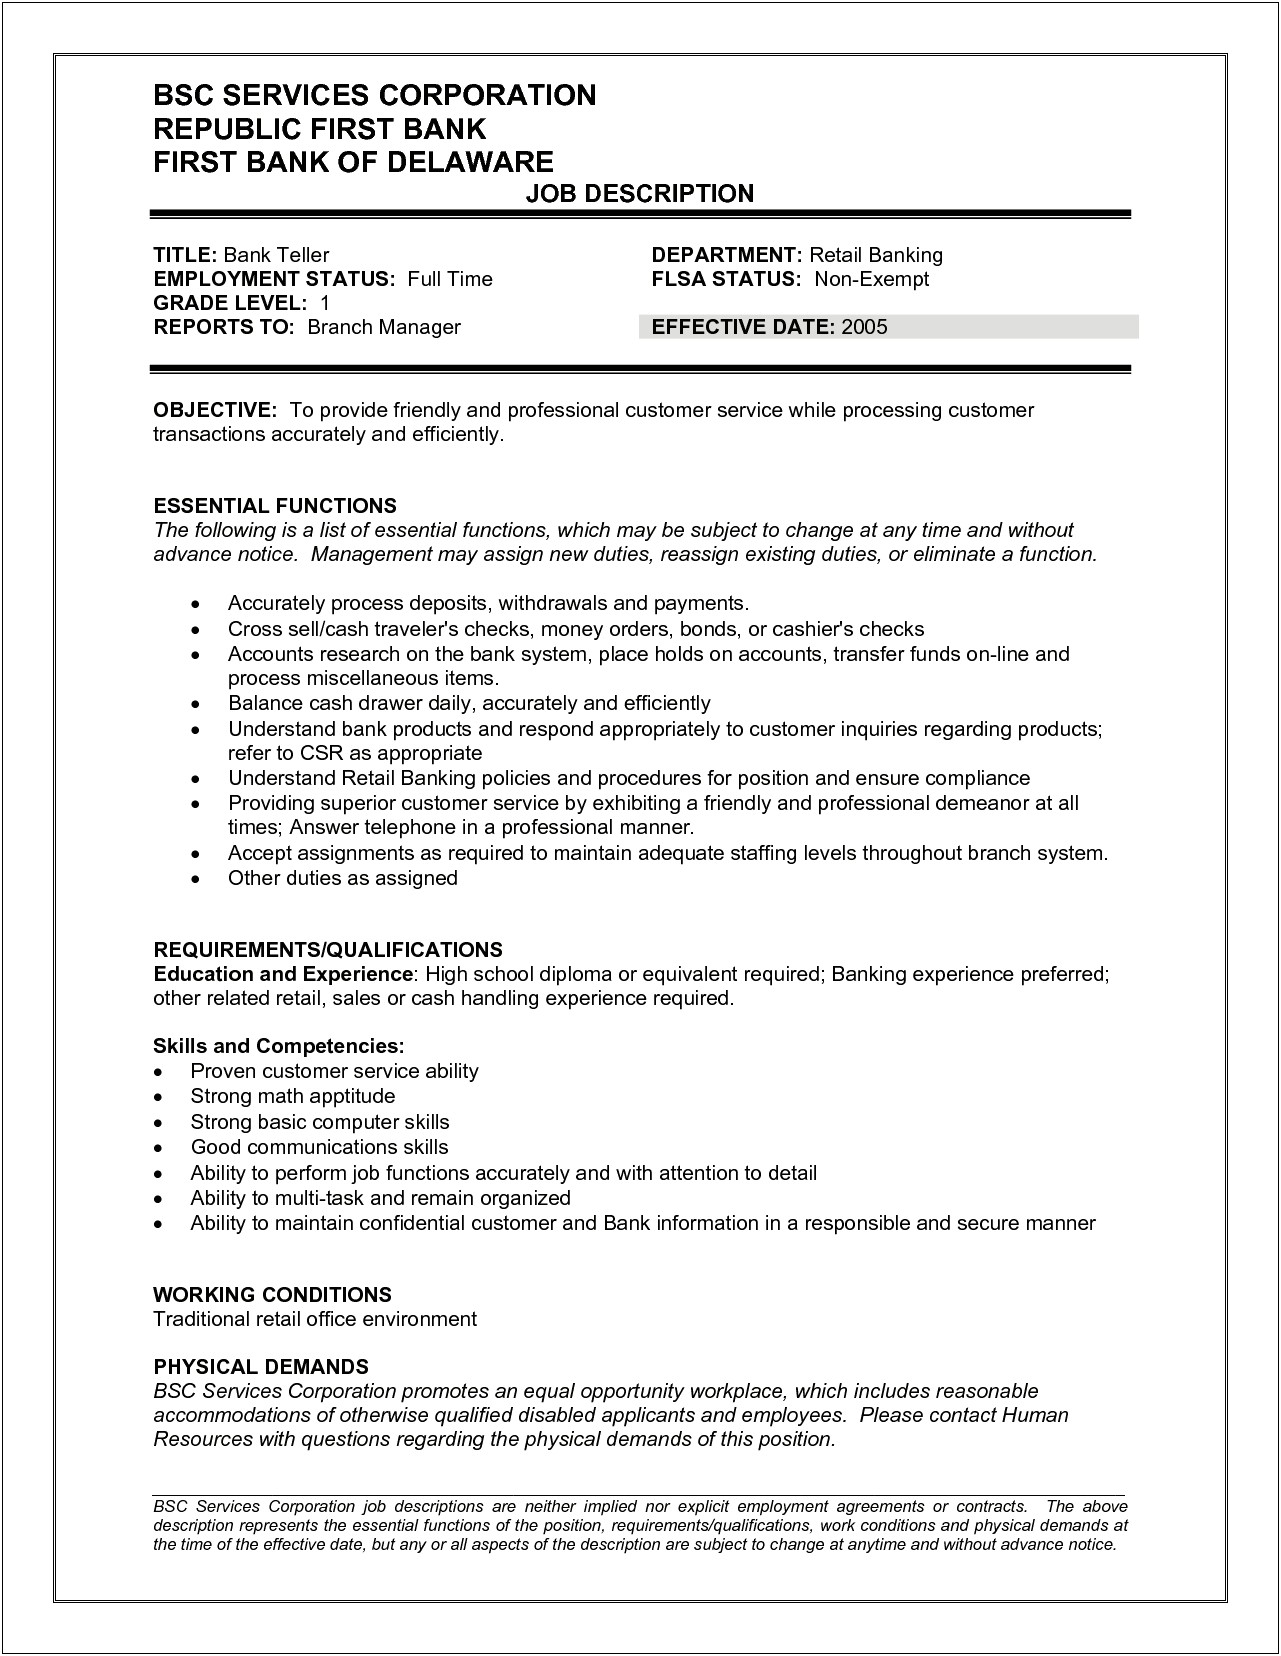 Resume Objective For Working At A Bank